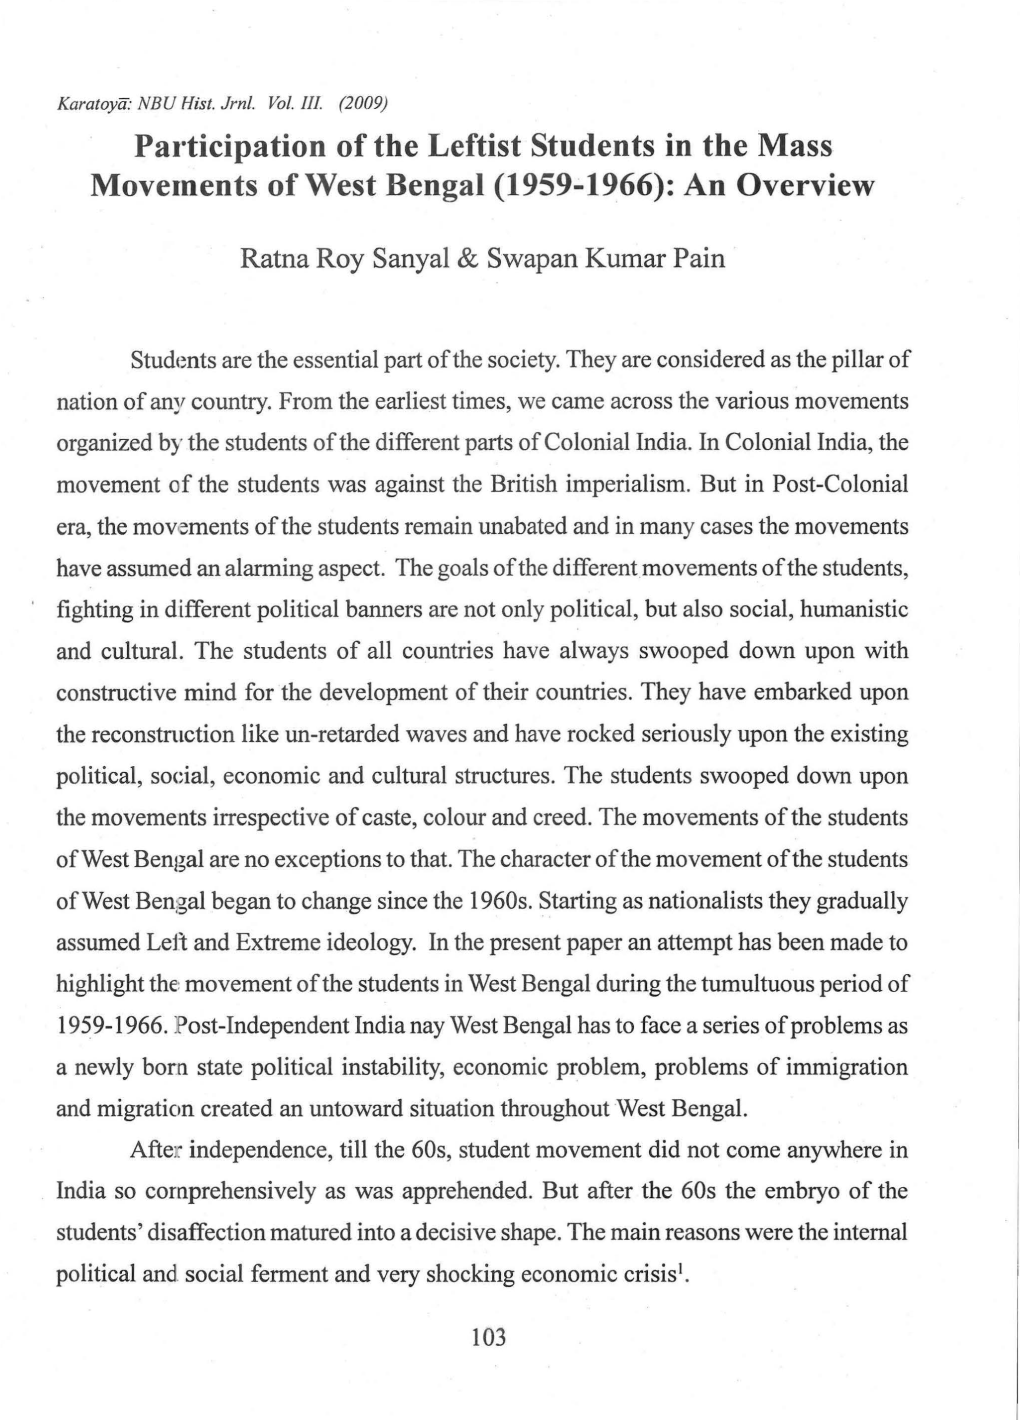 Participation of the Leftist Students in the Mass Move1nents of West Bengal (1959-1966): an Overview